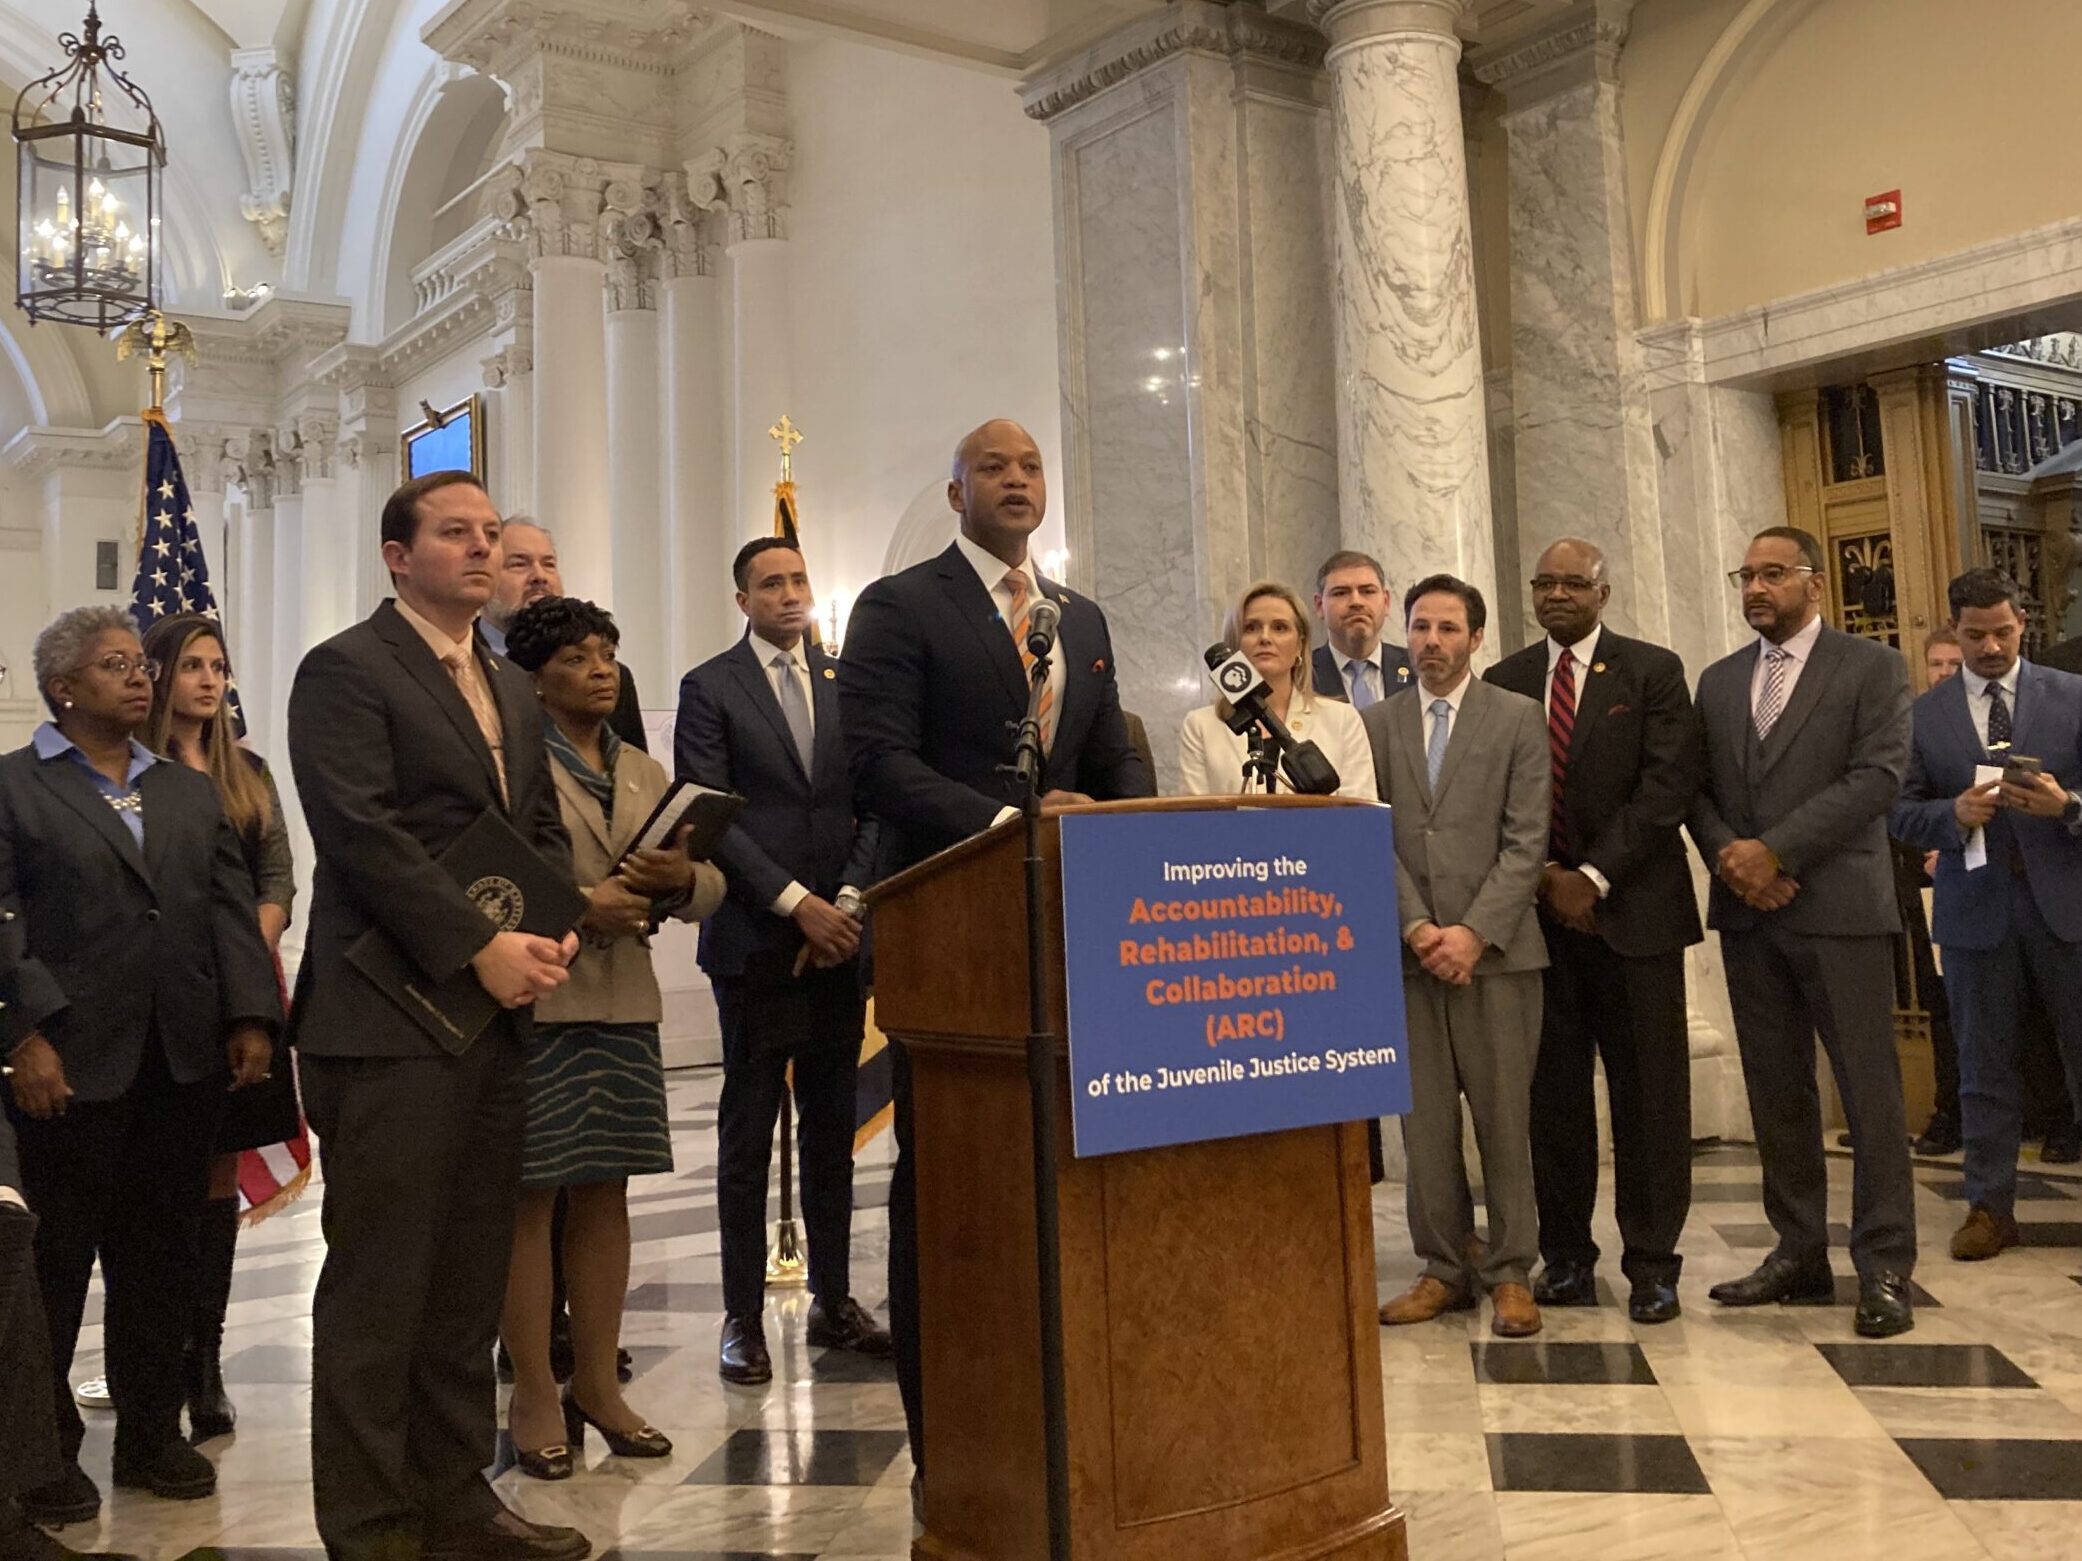 Maryland Gov. Wes Moore speaks from a podium during a press conference in the State House, surrounded by Democratic lawmakers.